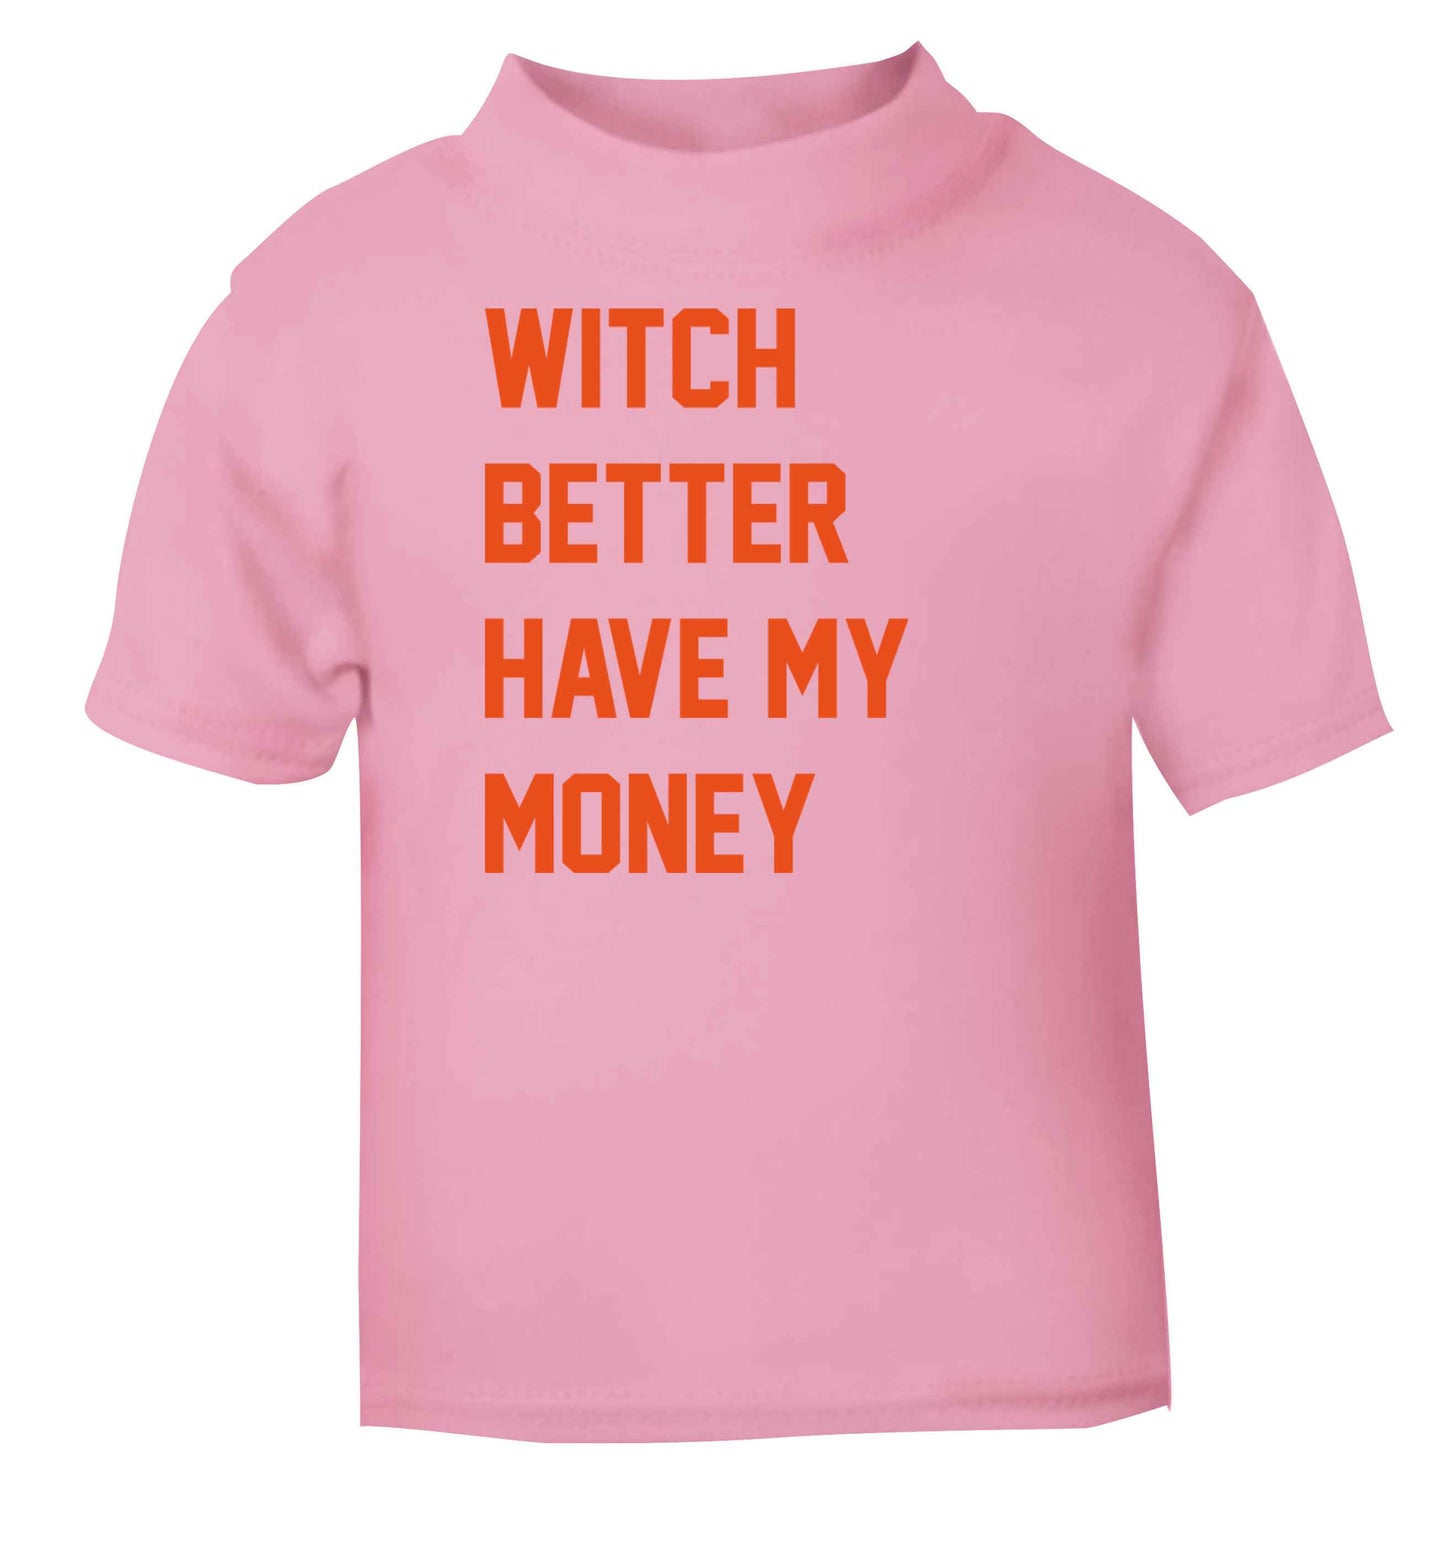 Witch better have my money light pink baby toddler Tshirt 2 Years